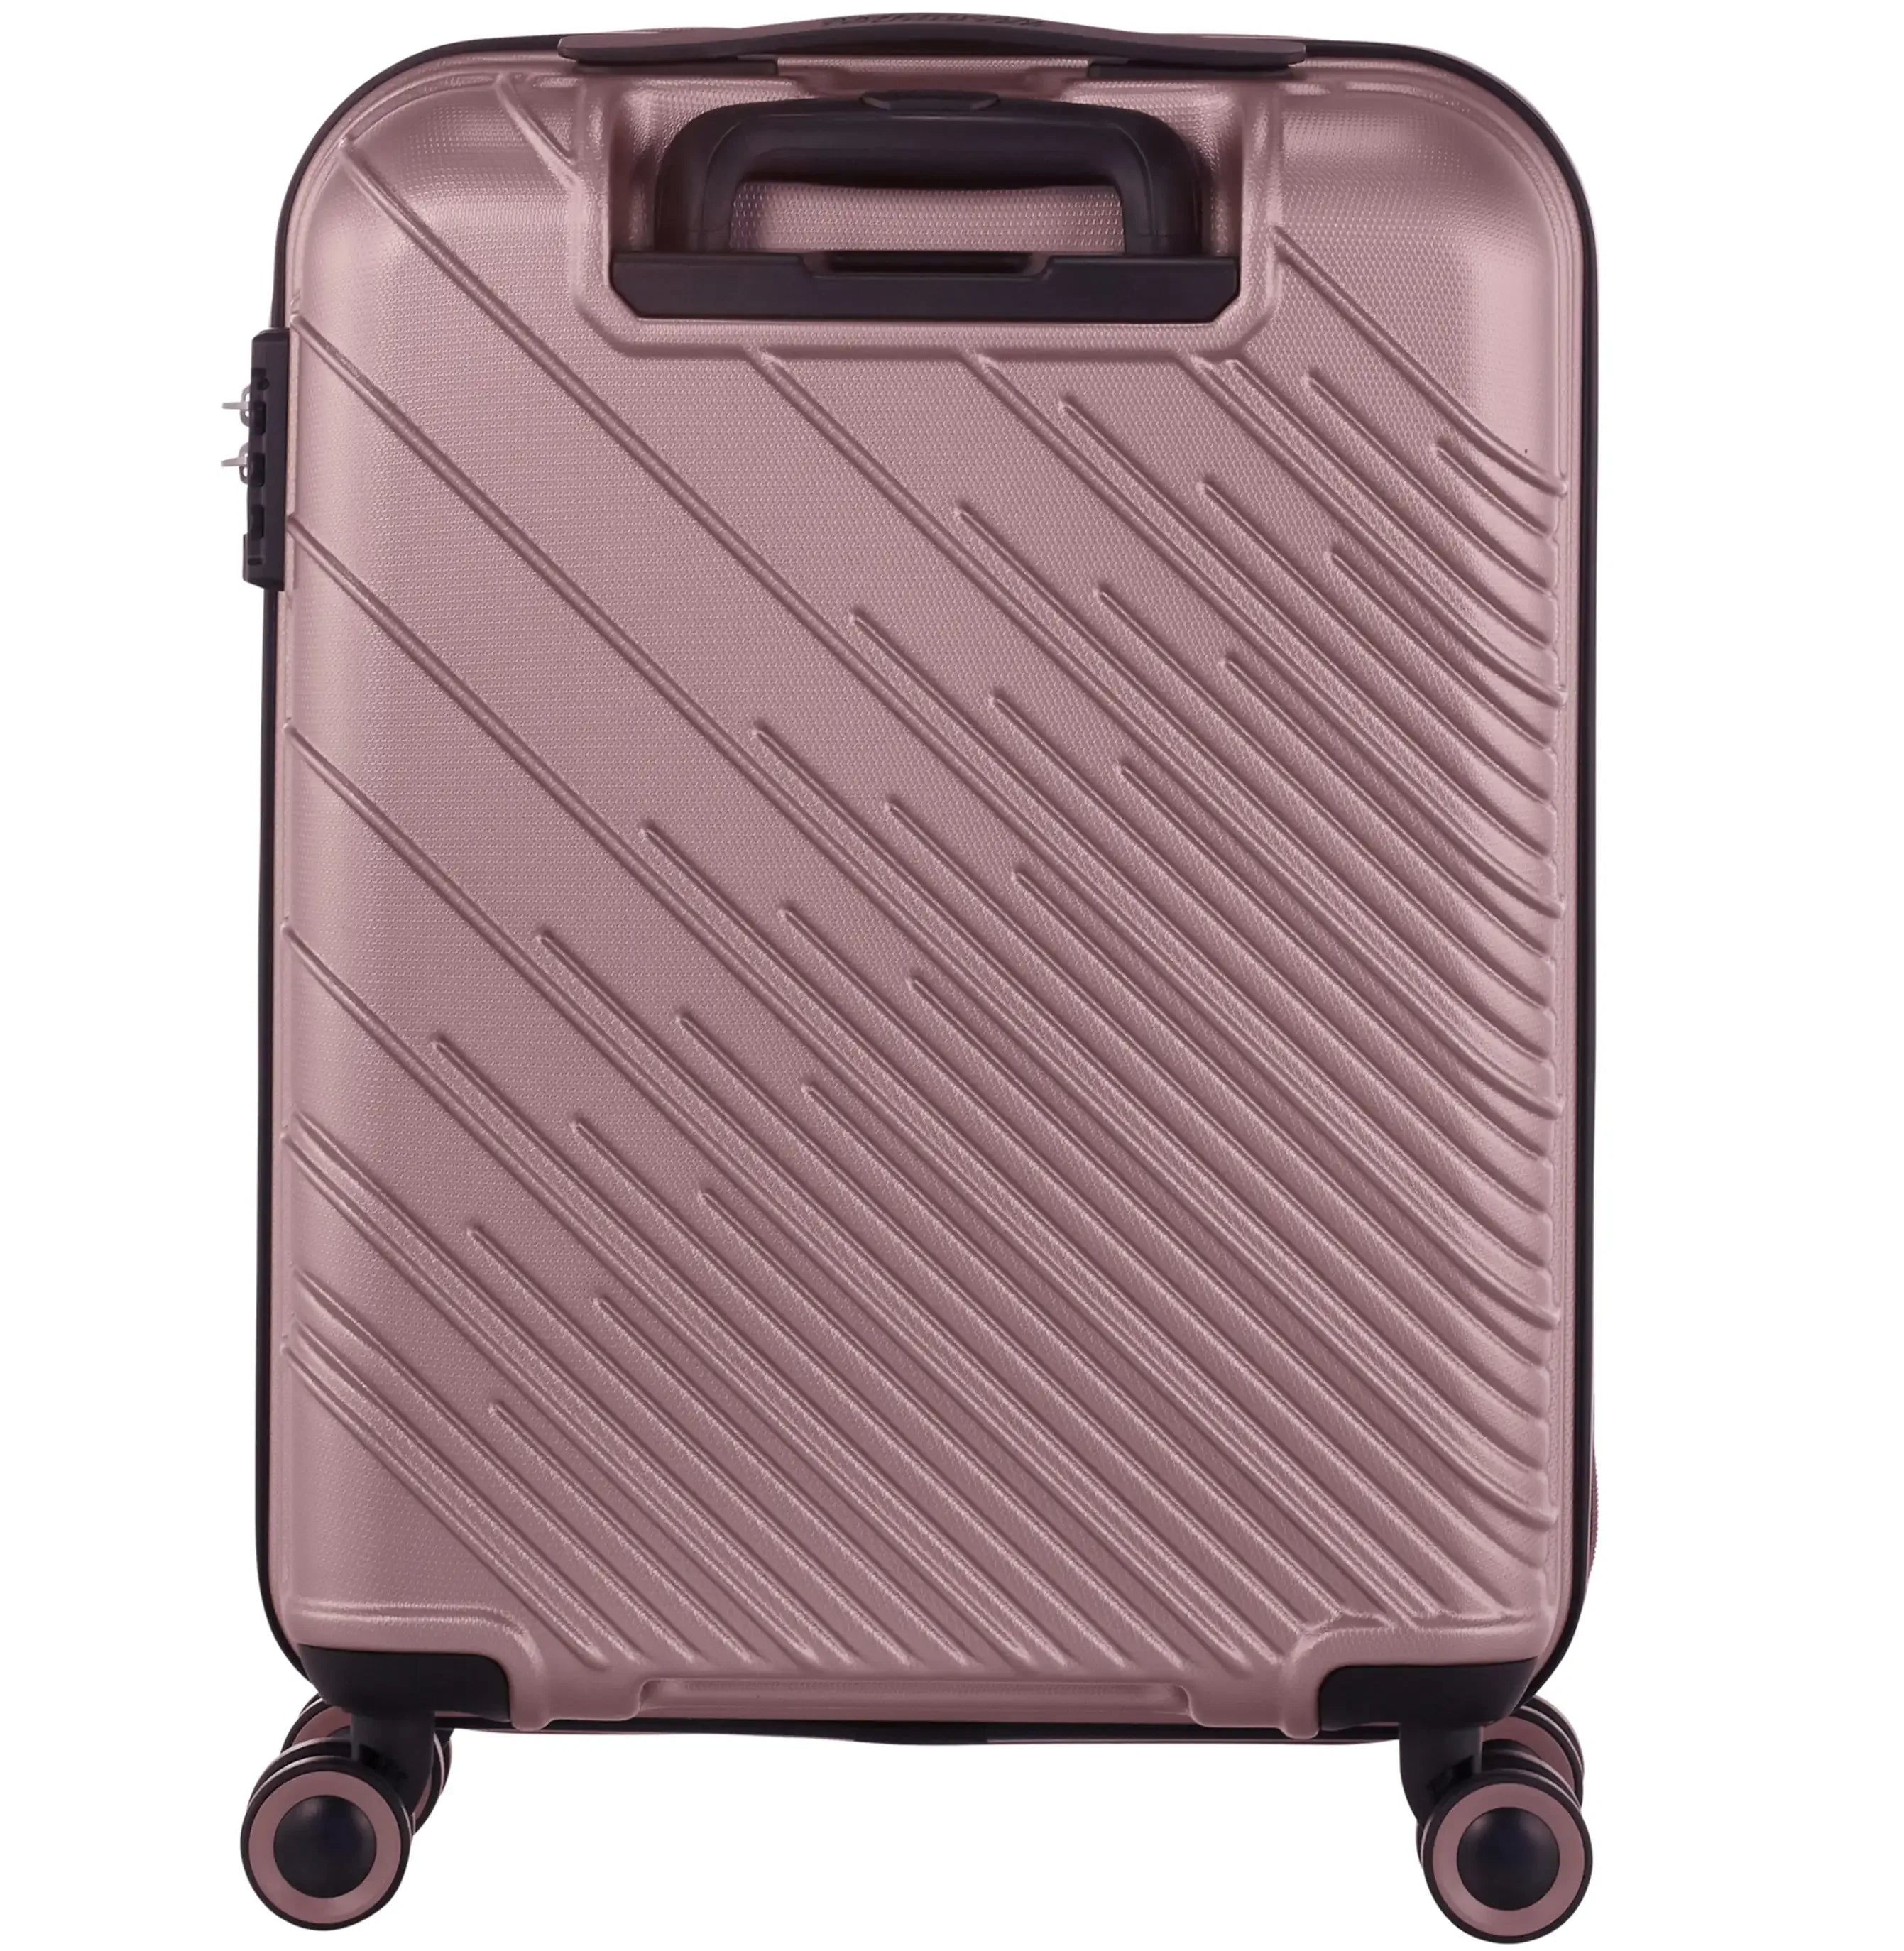 American Tourister Speedstar Spinner trolley cabine 4 roues 55 cm - orchidée